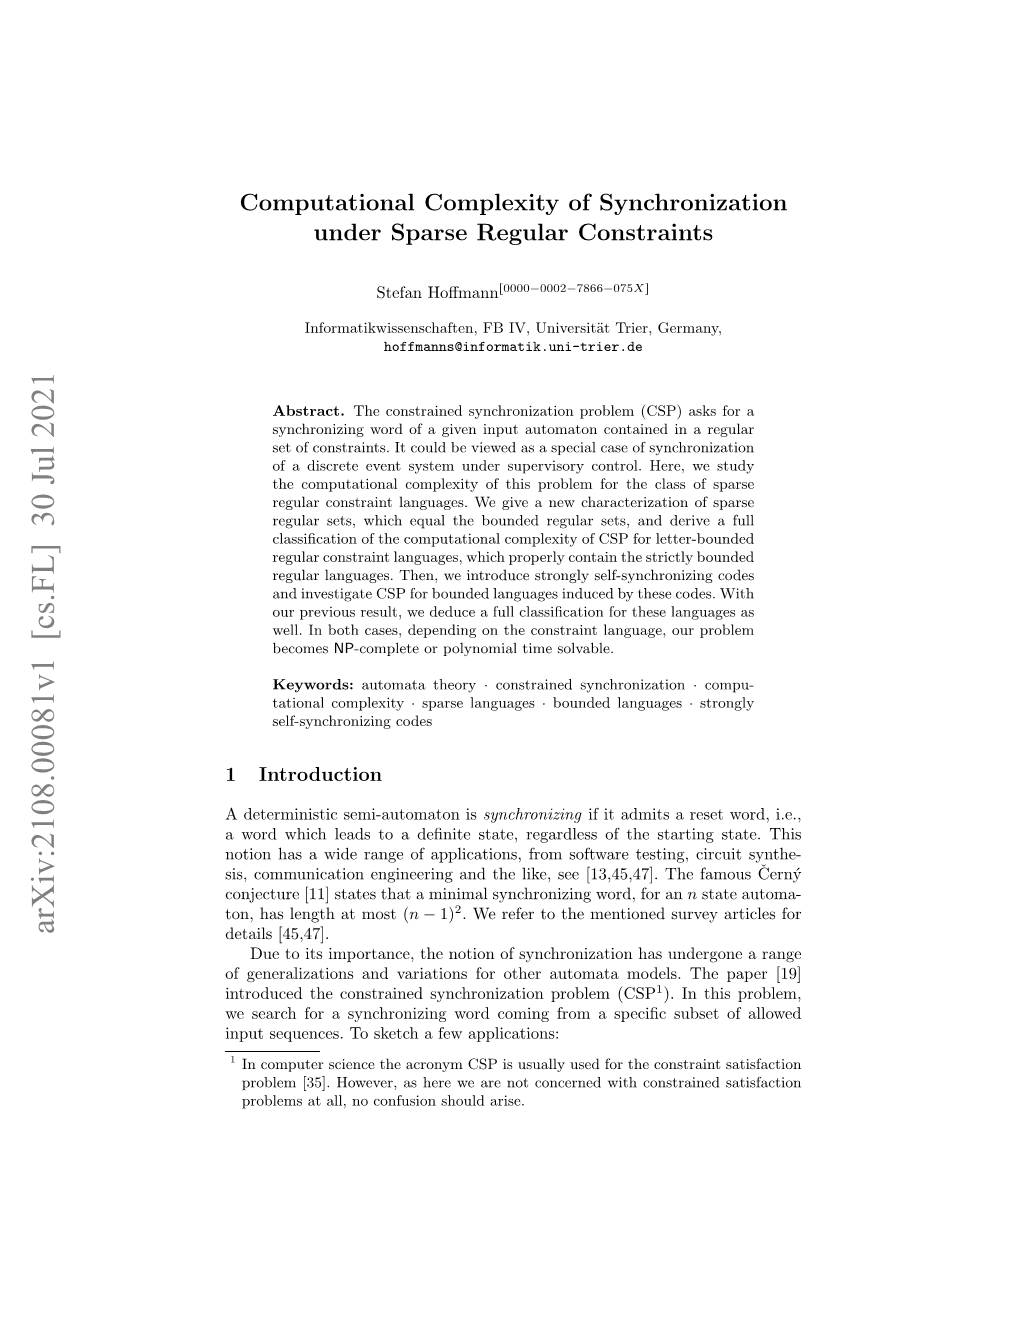 Computational Complexity of Synchronization Under Sparse Regular Constraints